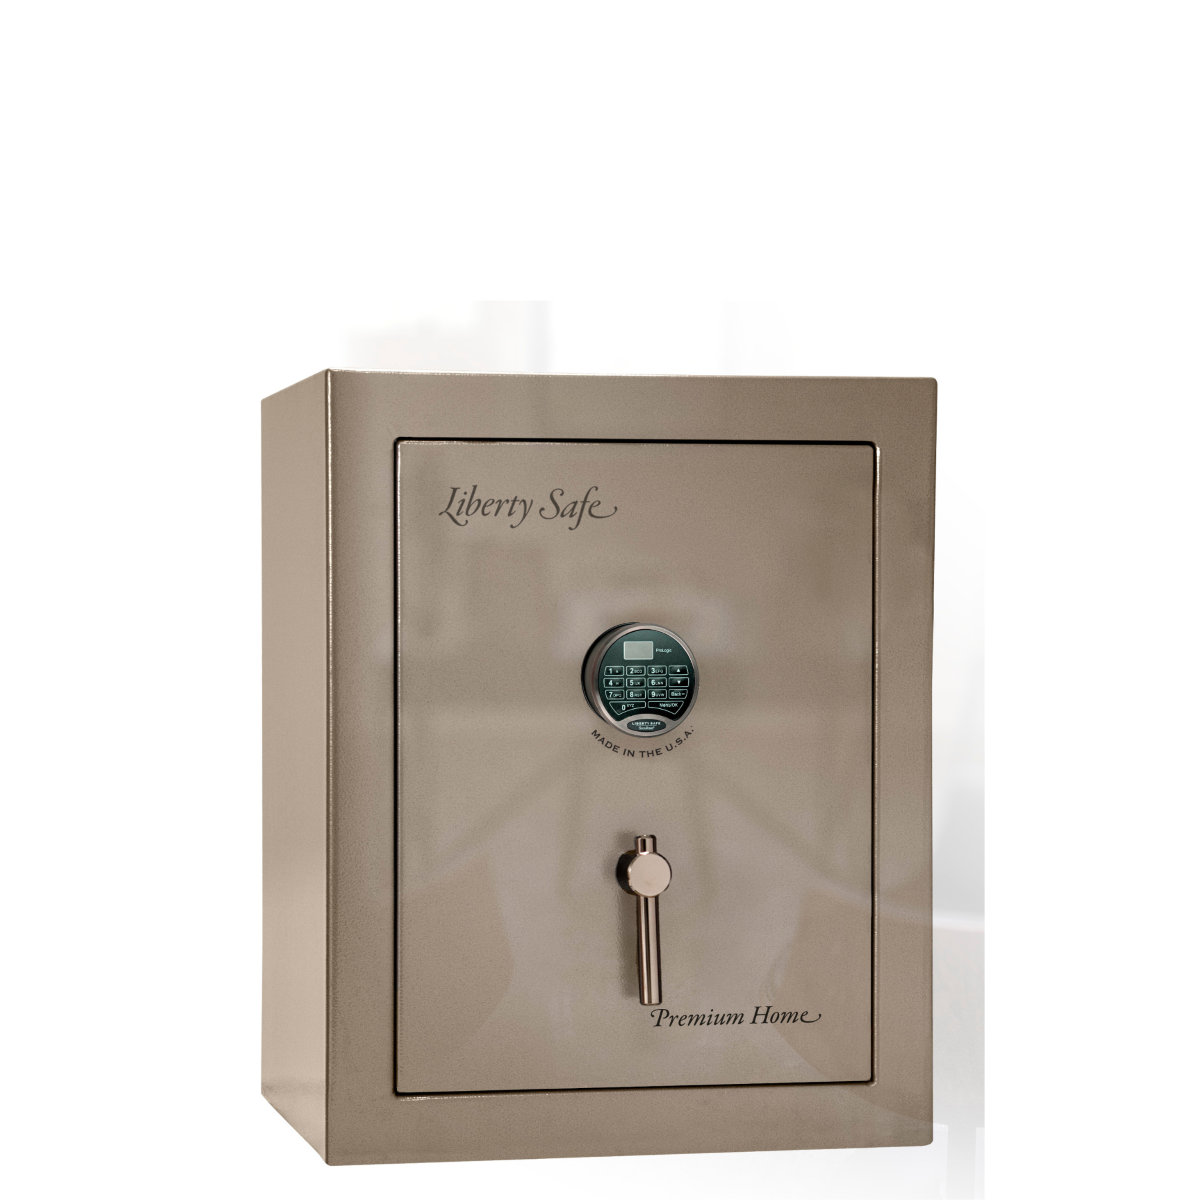 Premium Home Series | Level 7 Security | 2 Hour Fire Protection | 08 | Dimensions: 30"(H) x 24"(W) x 20.25"(D) | Champagne Gloss - Closed Door